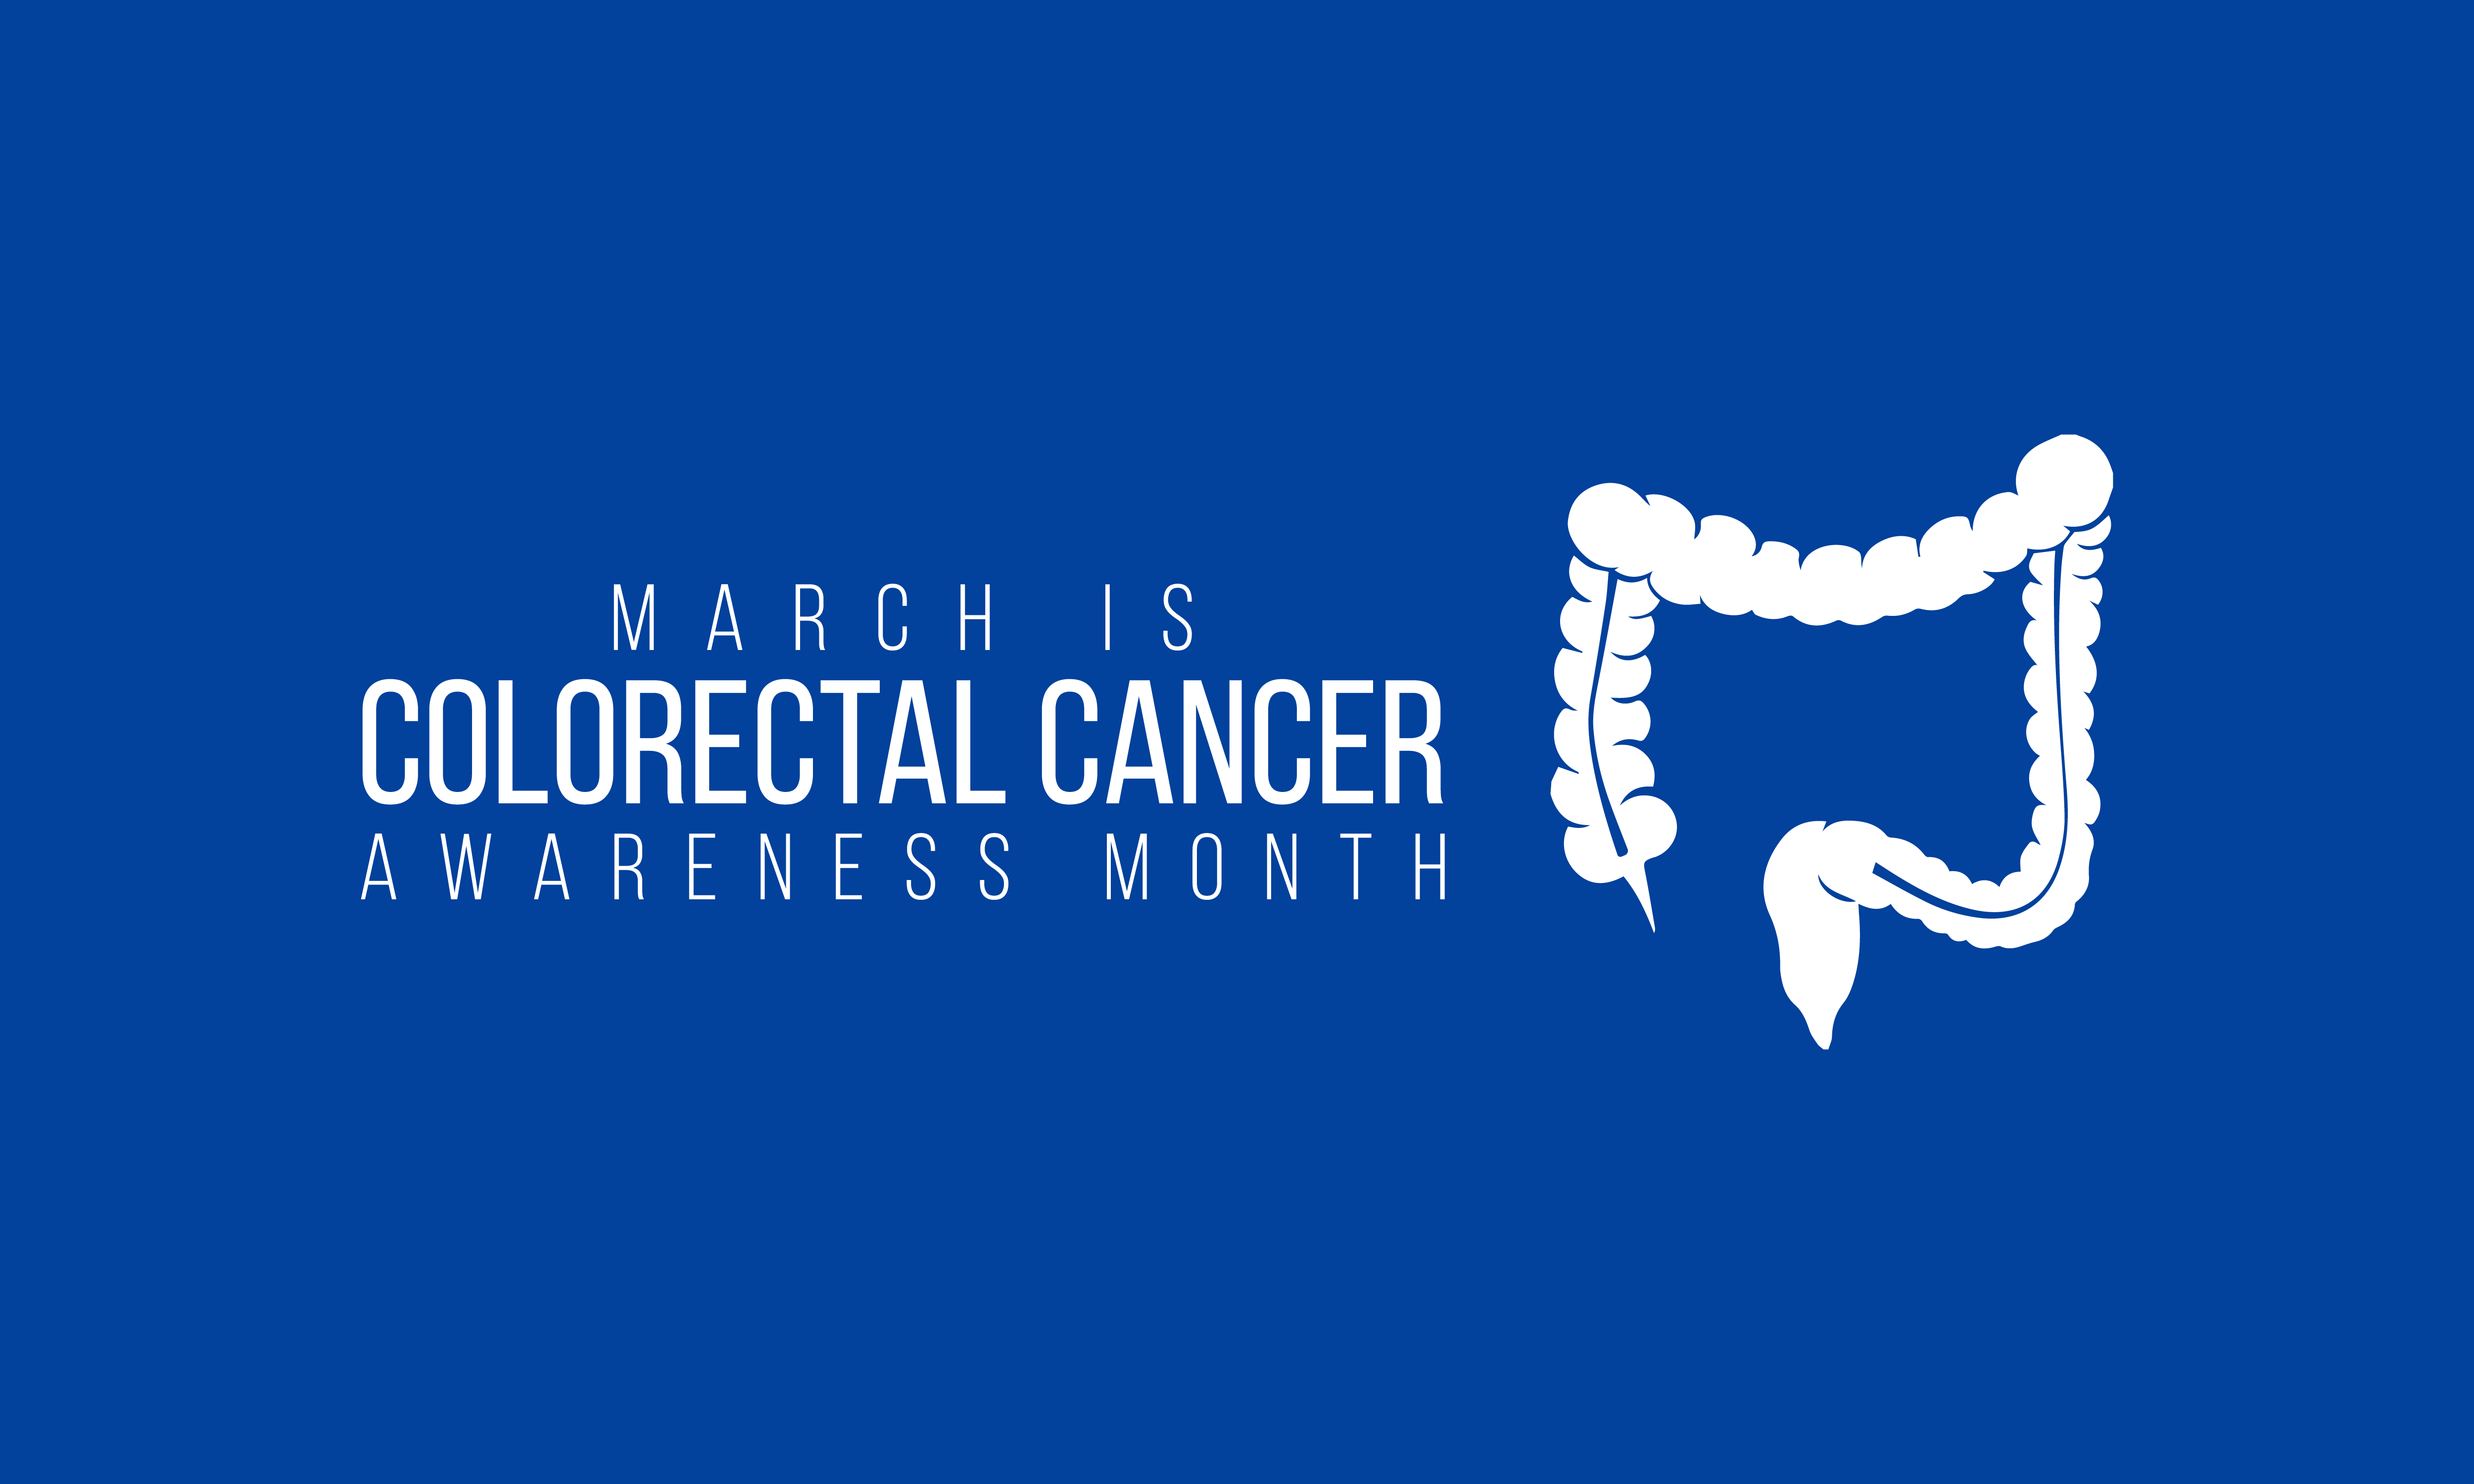 Learn More About Colorectal Cancer For Colorectal Cancer Awareness